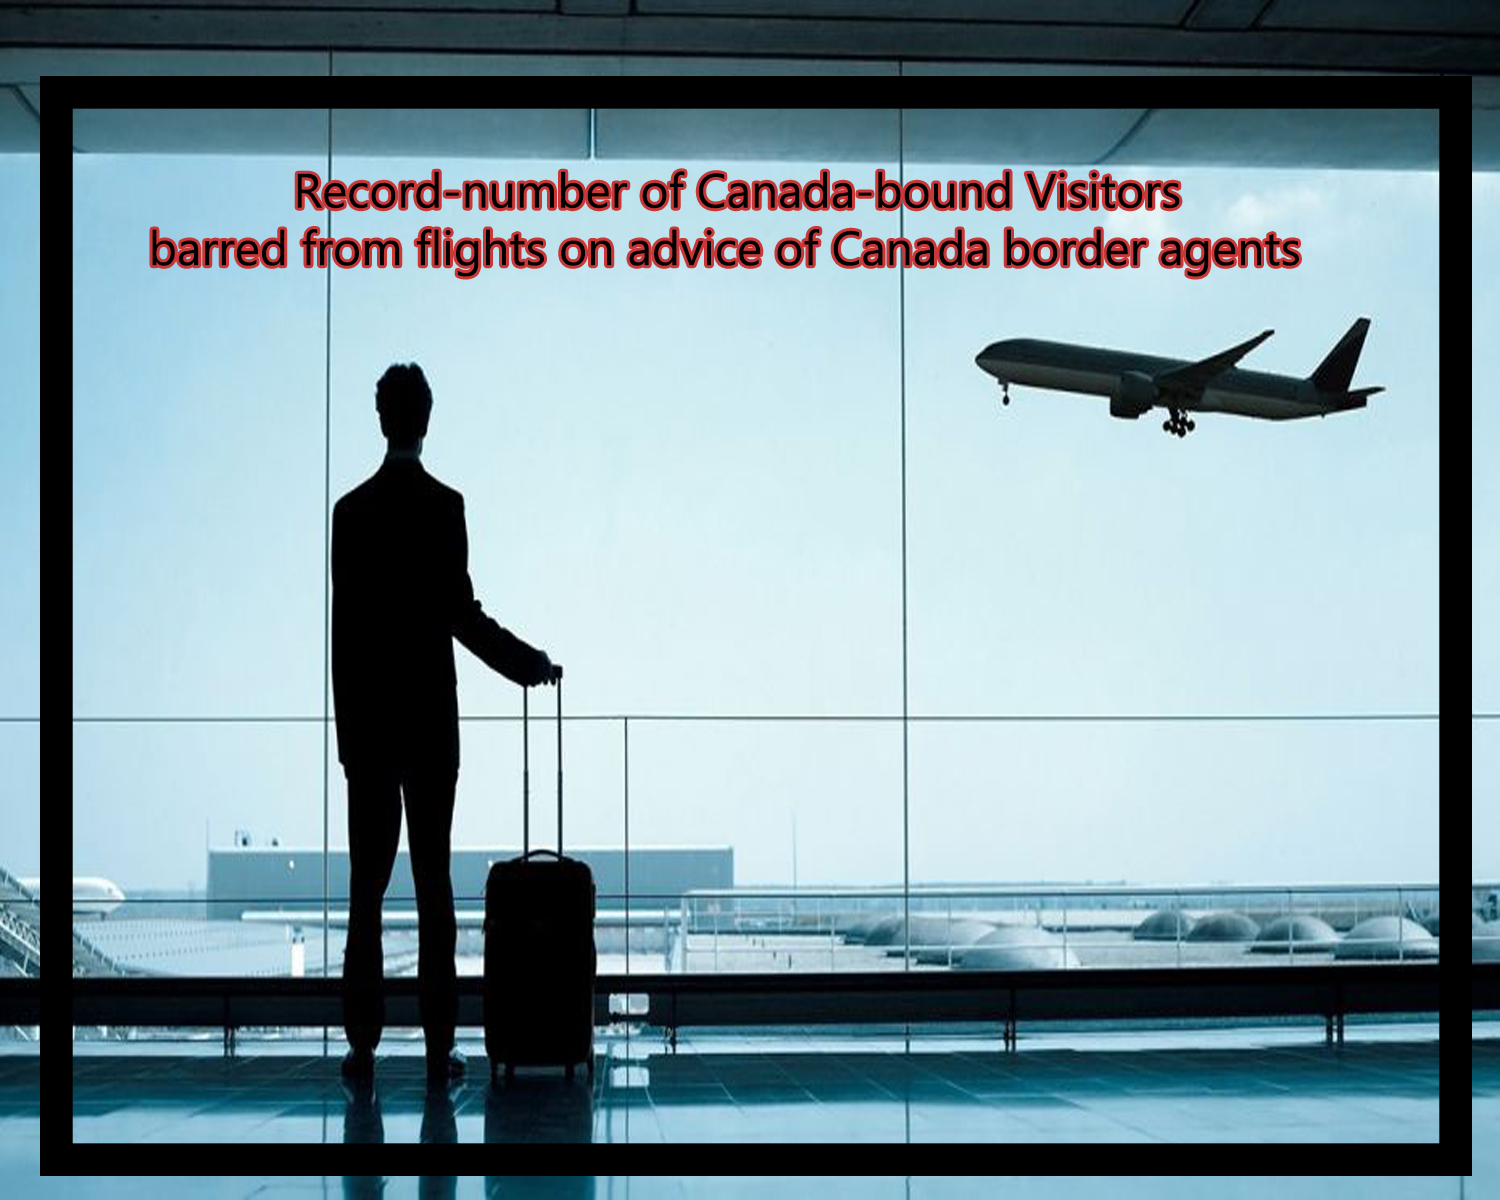 Record-number of Canada-bound Visitors barred from flights on advice of Canada border agents